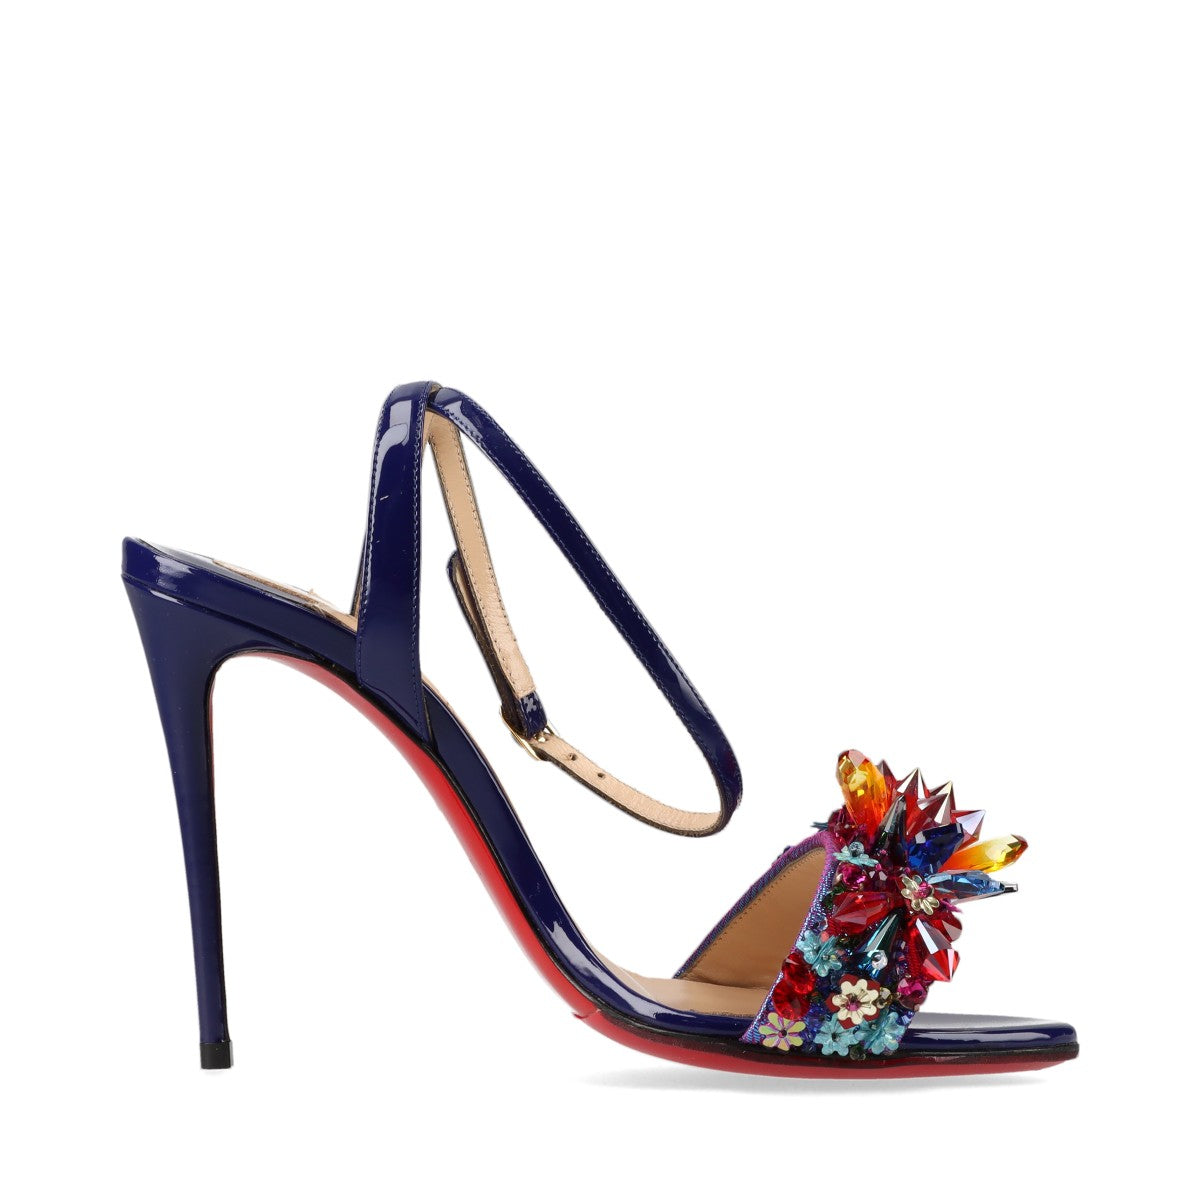 Christian Louboutin Patent leather Sandals 35 Ladies' Navy x red Multiqueen Crystal Bijou Strap box There is a storage bag